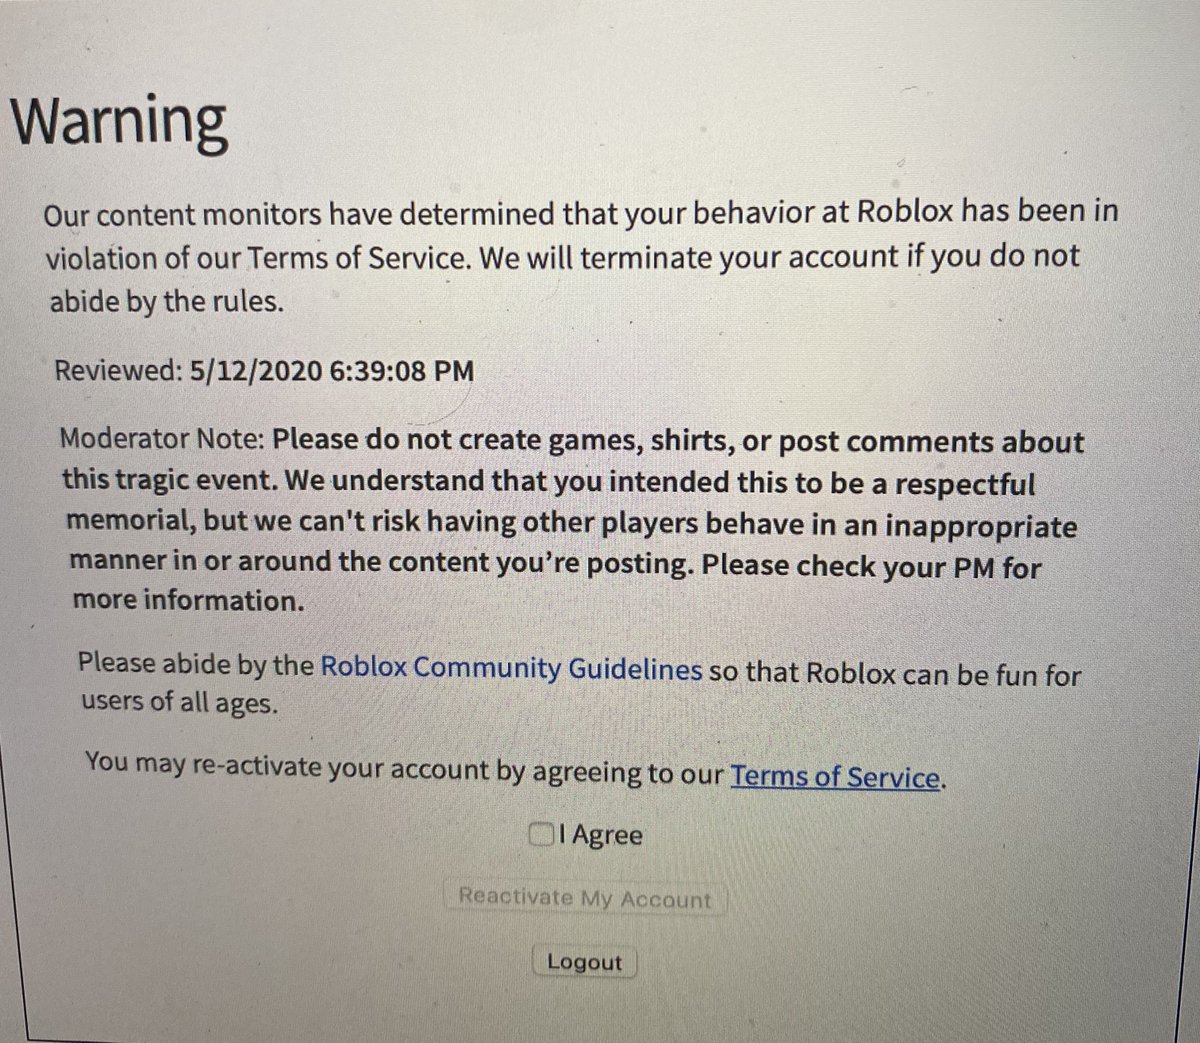 Divine Sister On Twitter Ah Now That Content Related To The Coronavirus Pandemic Is Now Illegal To The Games In The Pic Please Learn From Our Tragic Suspension And Follow We - robloxcan we like not do this please